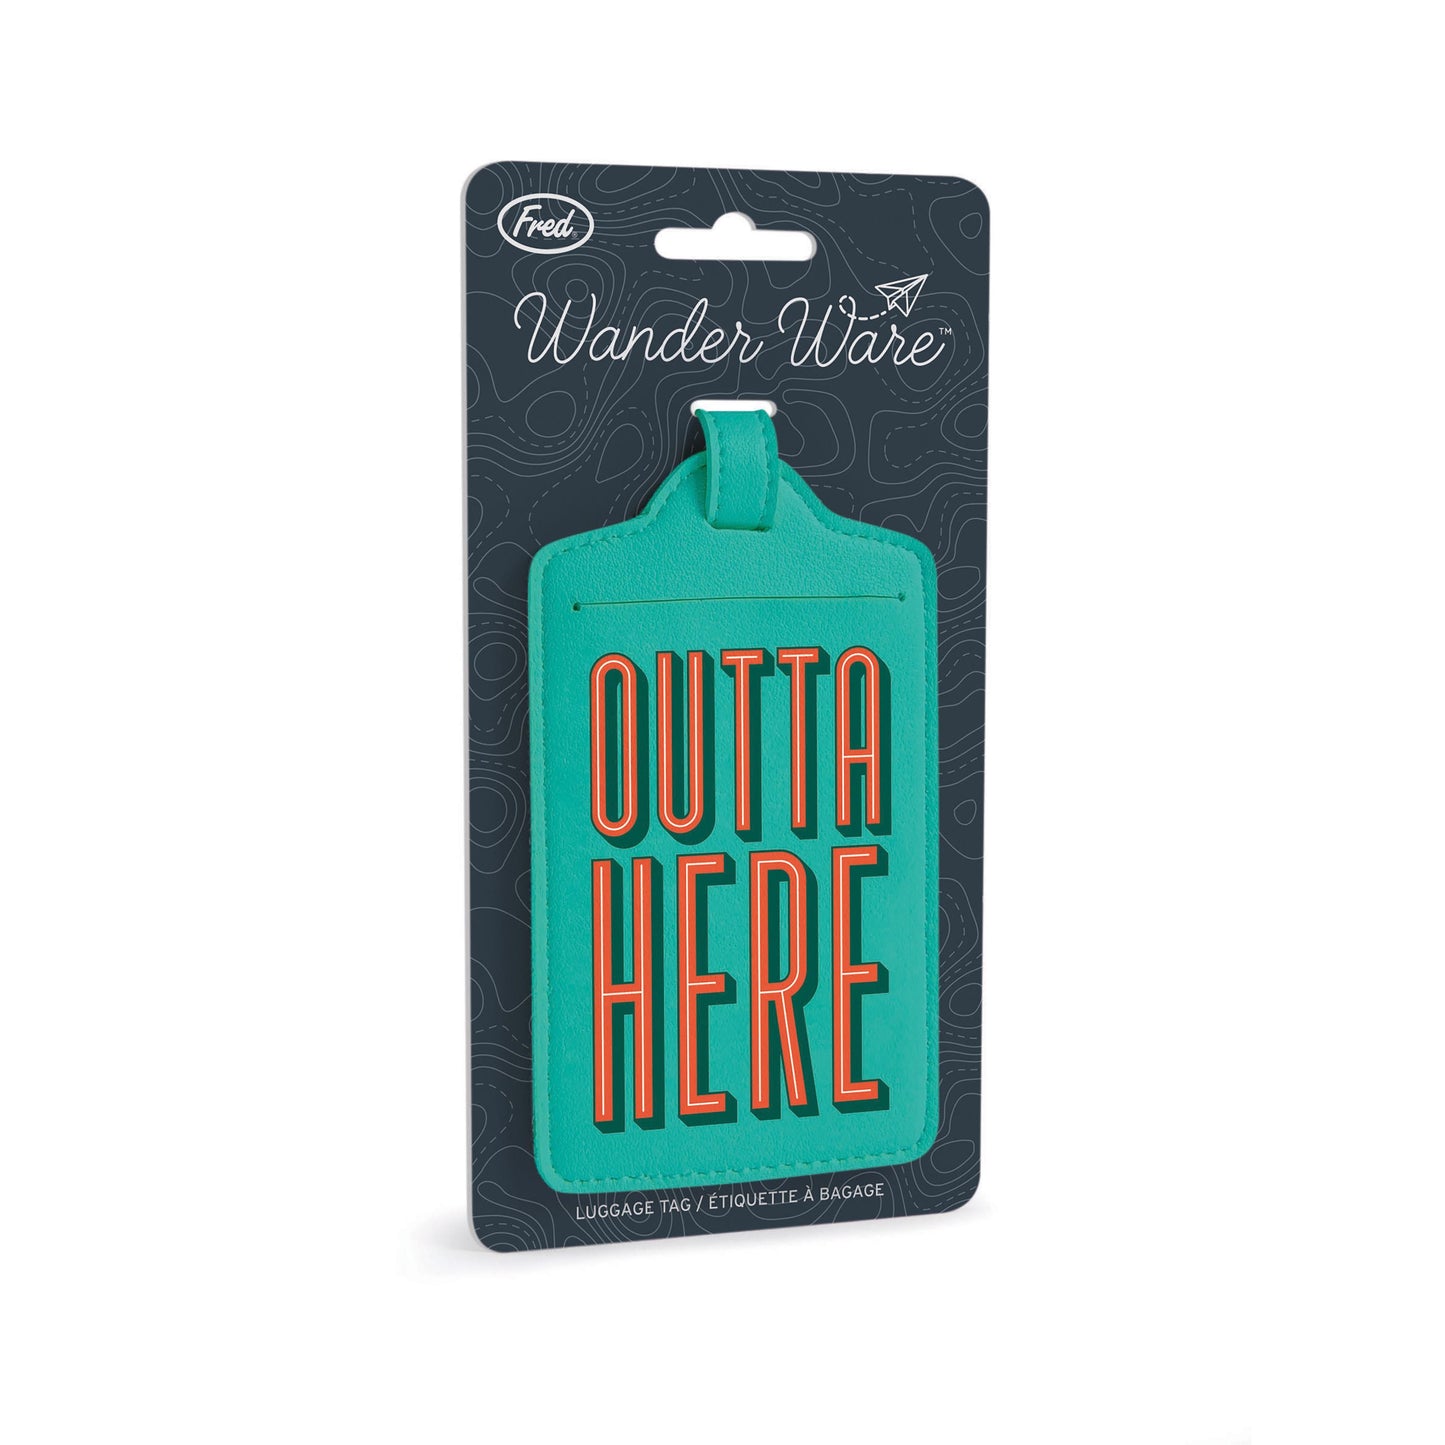 Wander Ware Luggage Tag - Outta Here